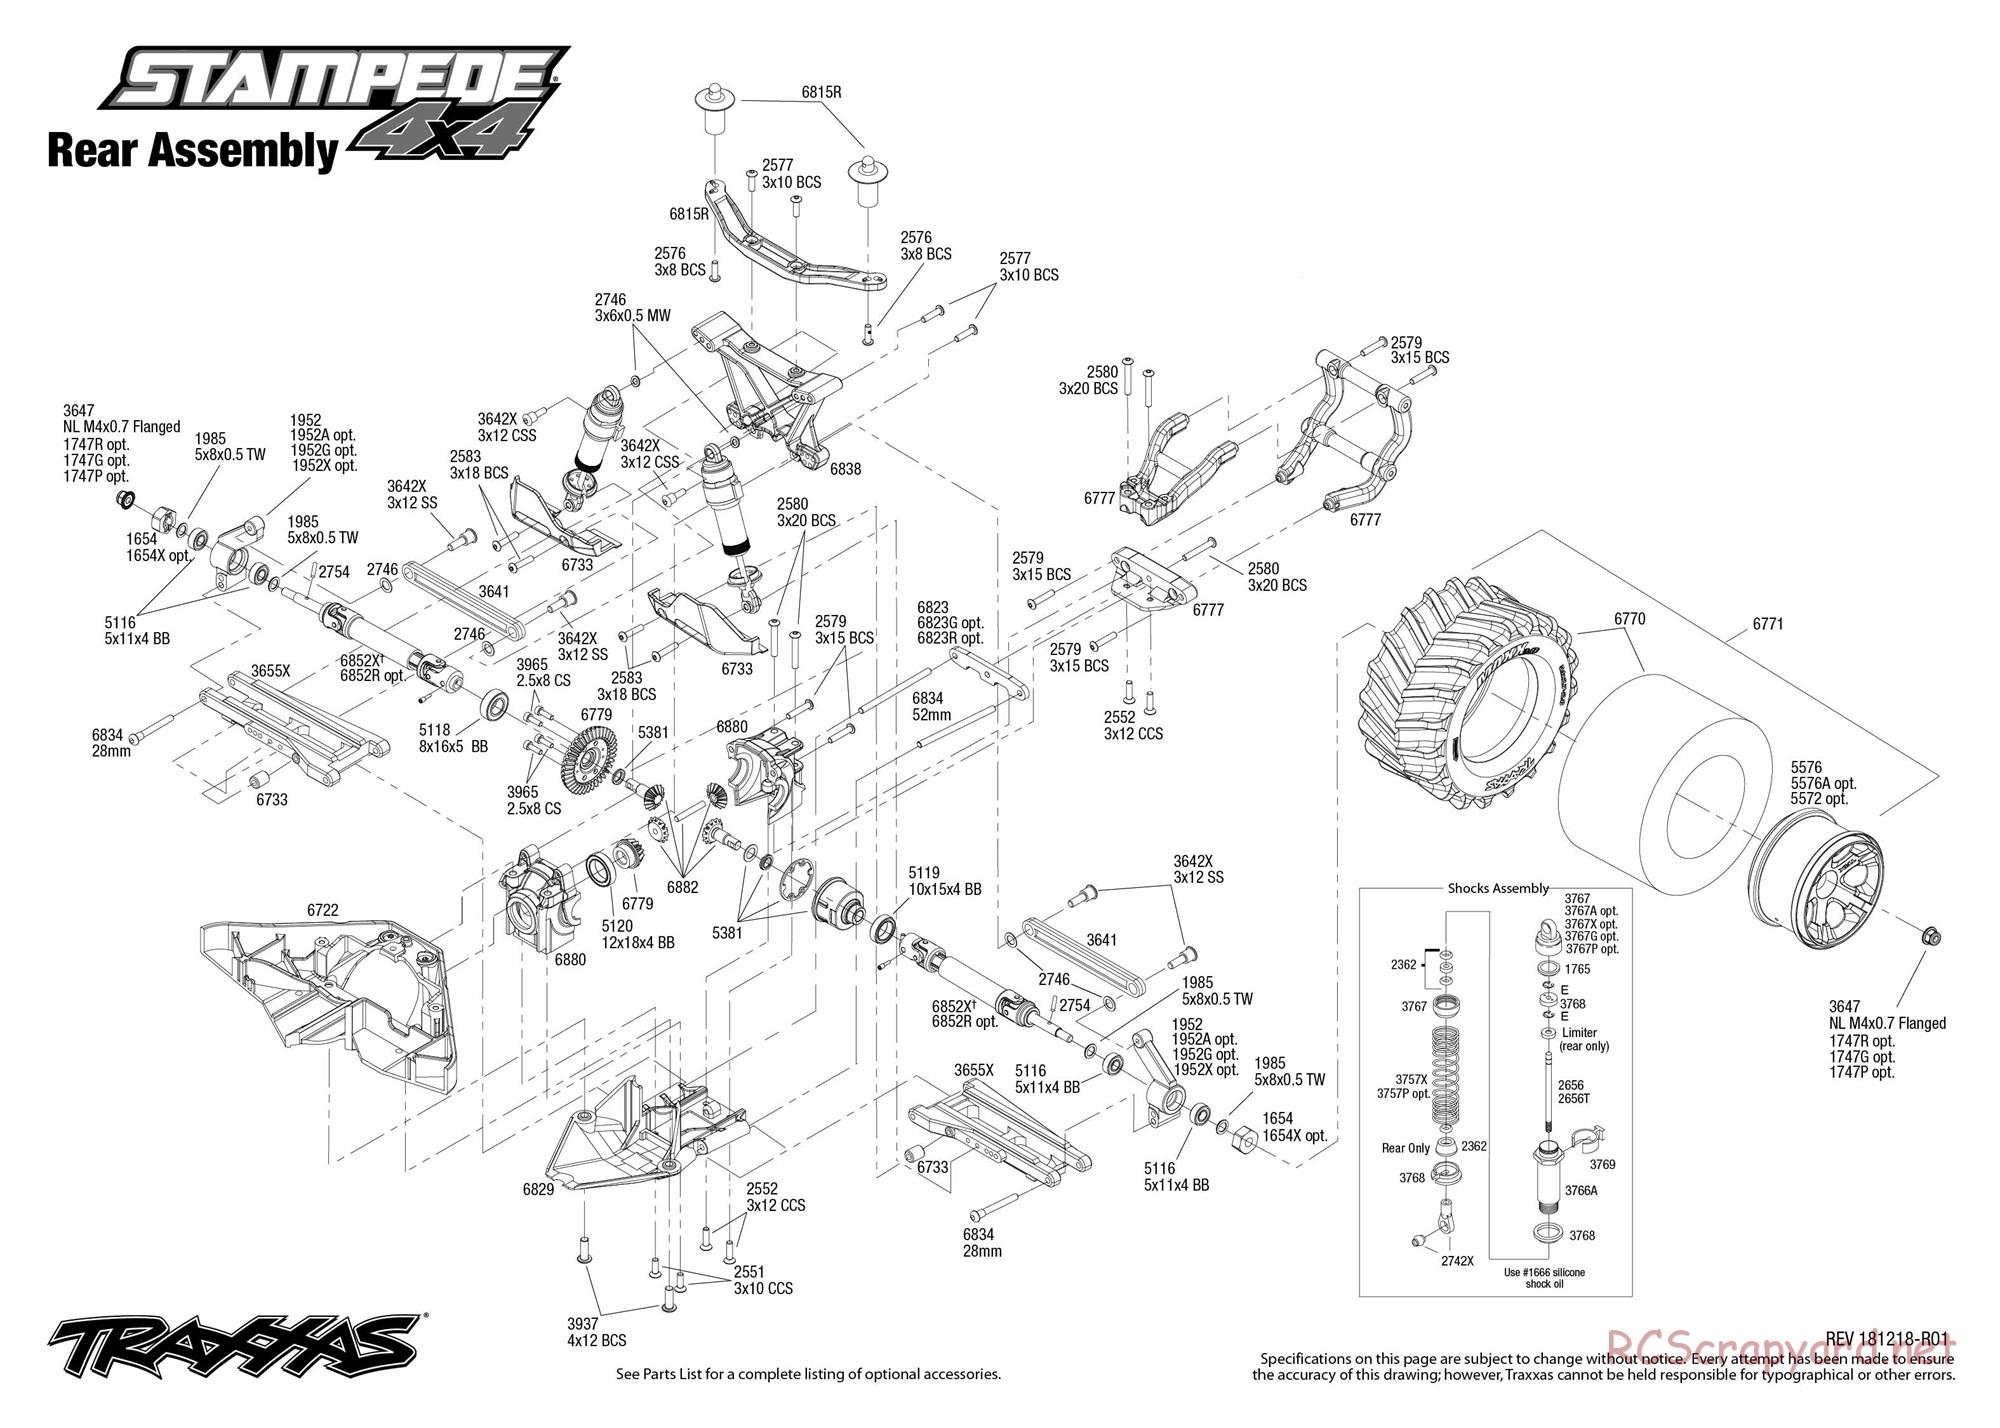 Traxxas - Stampede 4x4 (2019) - Exploded Views - Page 4